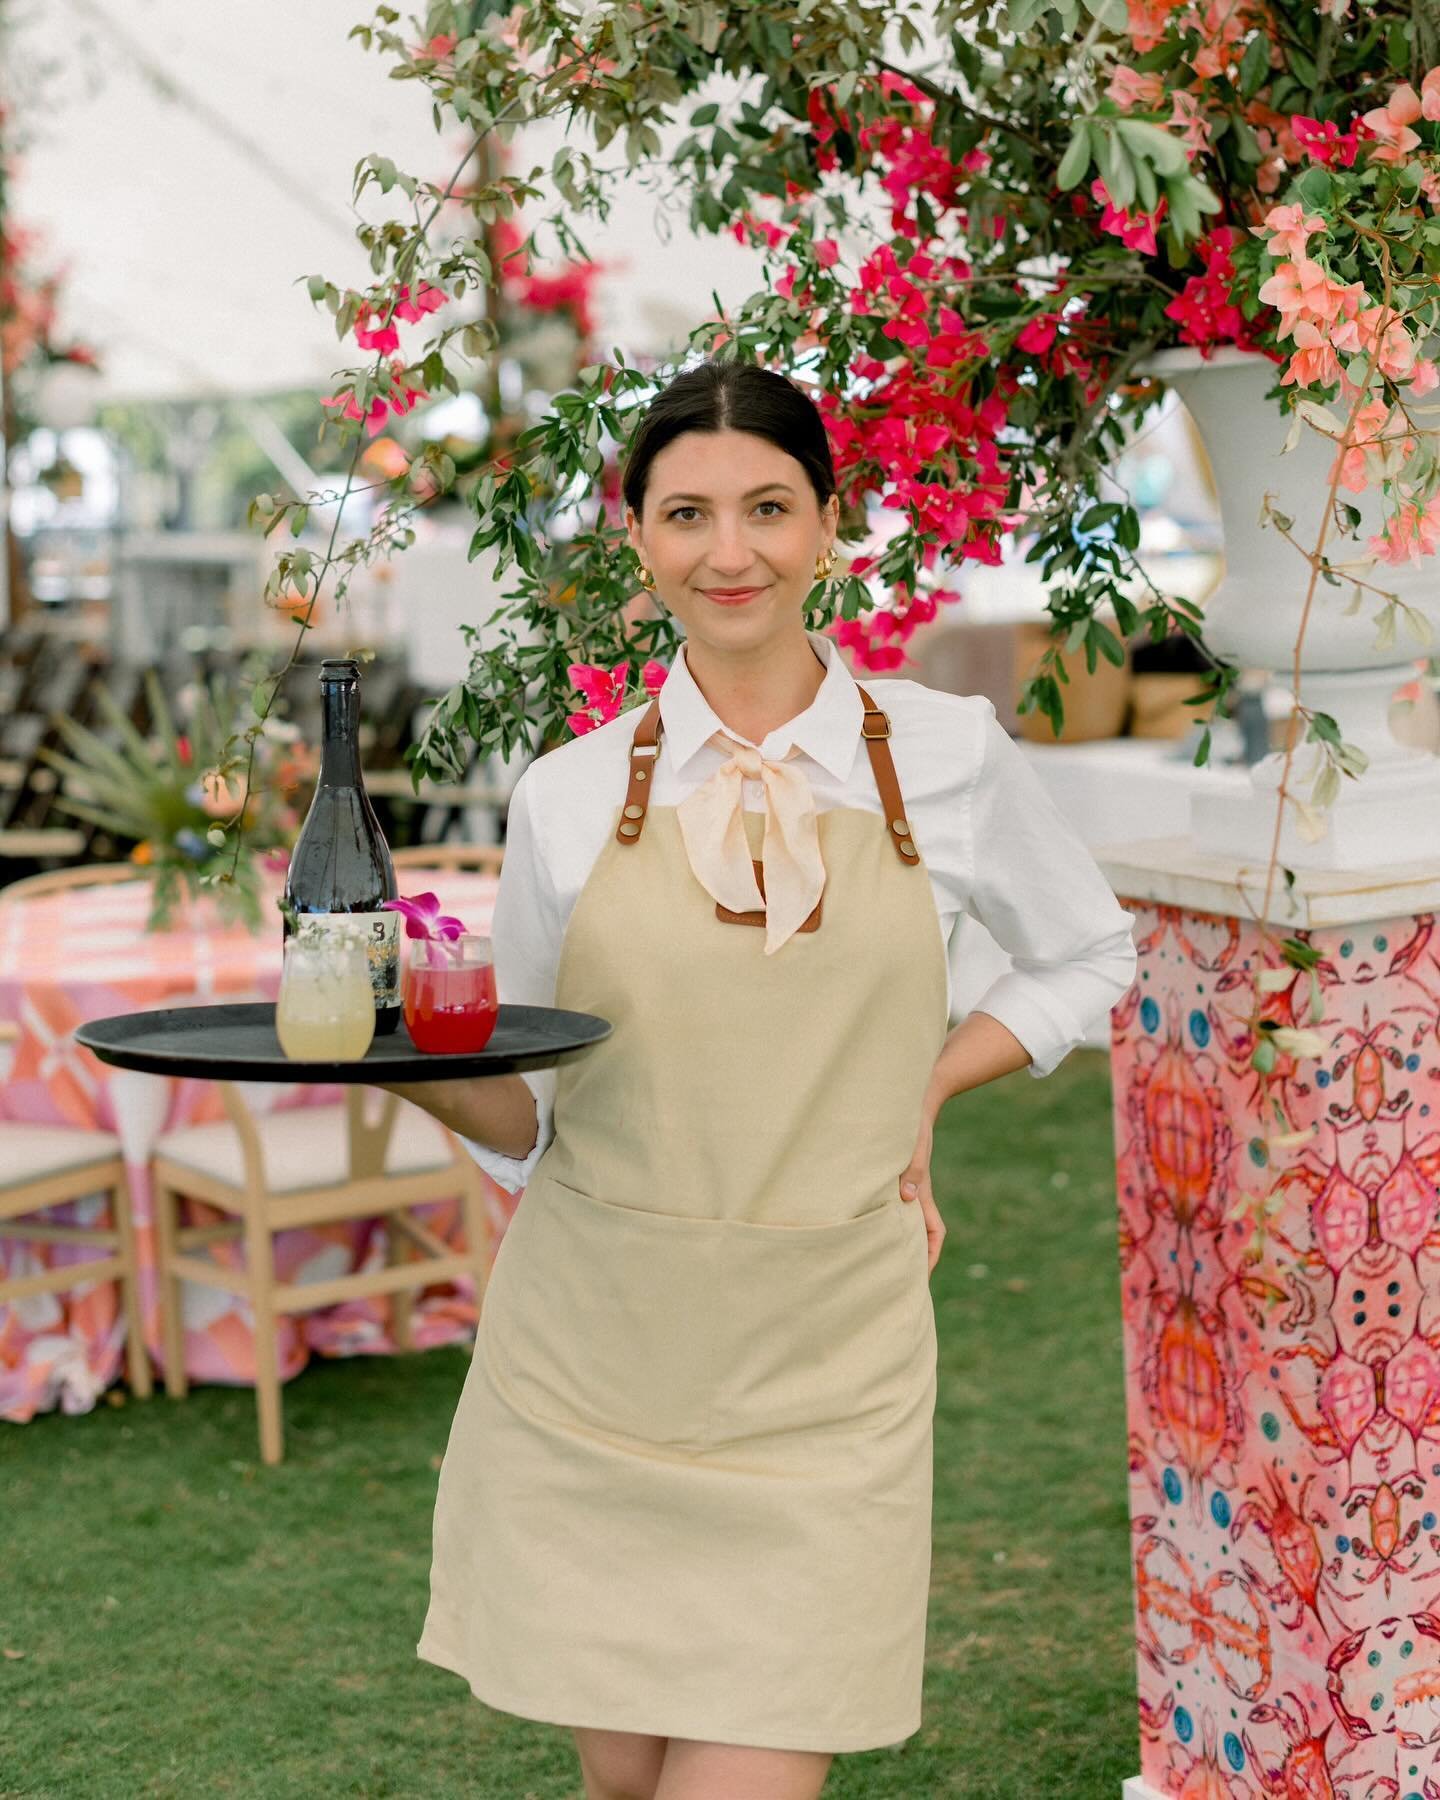 Craft mimosas at your service 🌸🥂

Event: @visit_pcb&rsquo;s UNwineD
Design: @rachelleyouddesigns
VIP Tent: @southernlivingmag 
Photog: @grayimages_photography 
Craft Bar: @thewanderingspiritfl